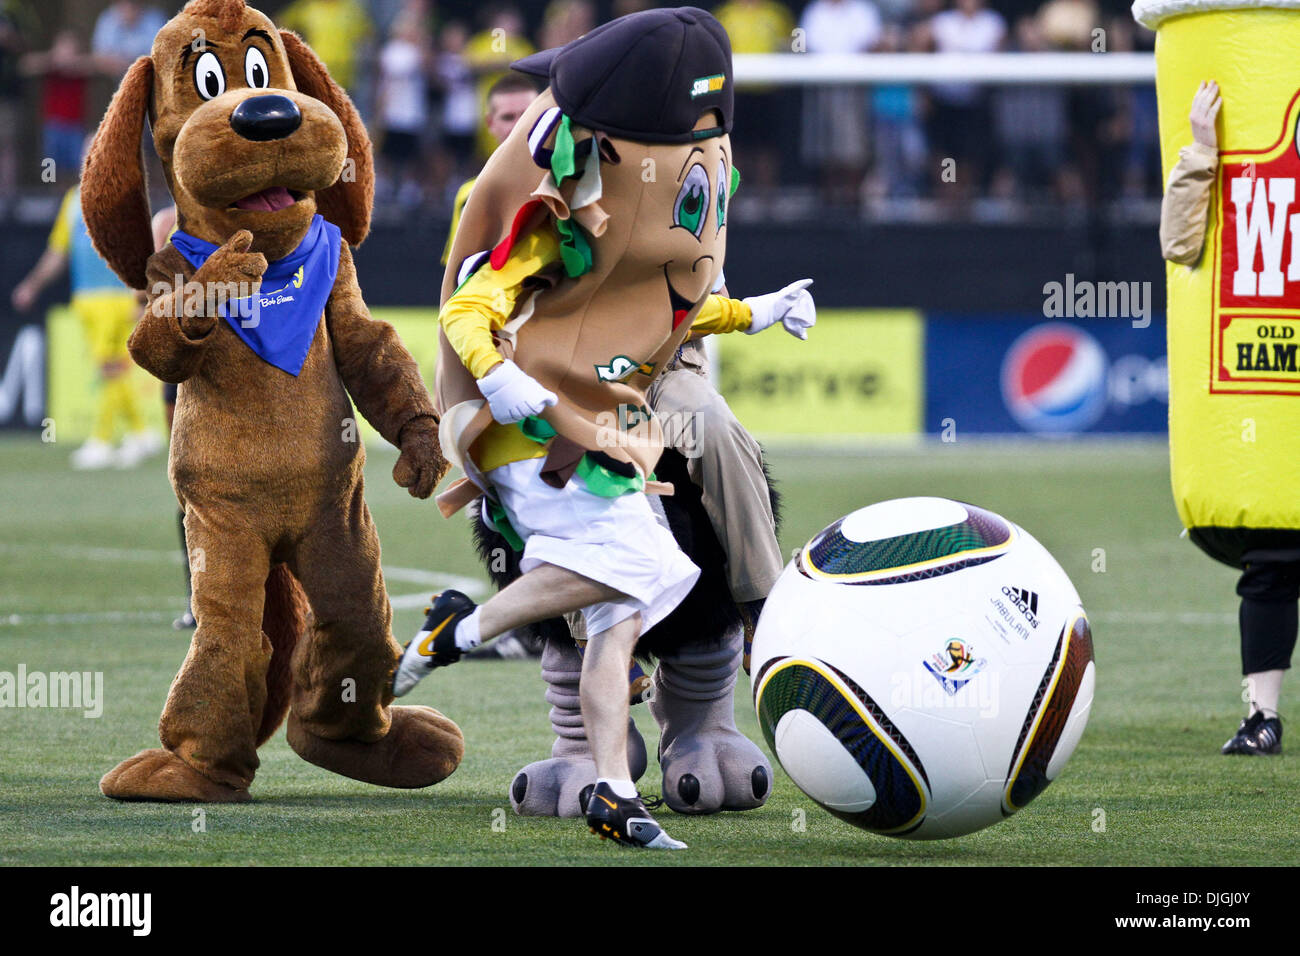 The Subway mascot kicks the ball during the halftime soccer match between  teams of mascots from all of the Crew corporate sponsors. Crew defeated the  Houston Dynamo 3-0 at Crew Stadium in